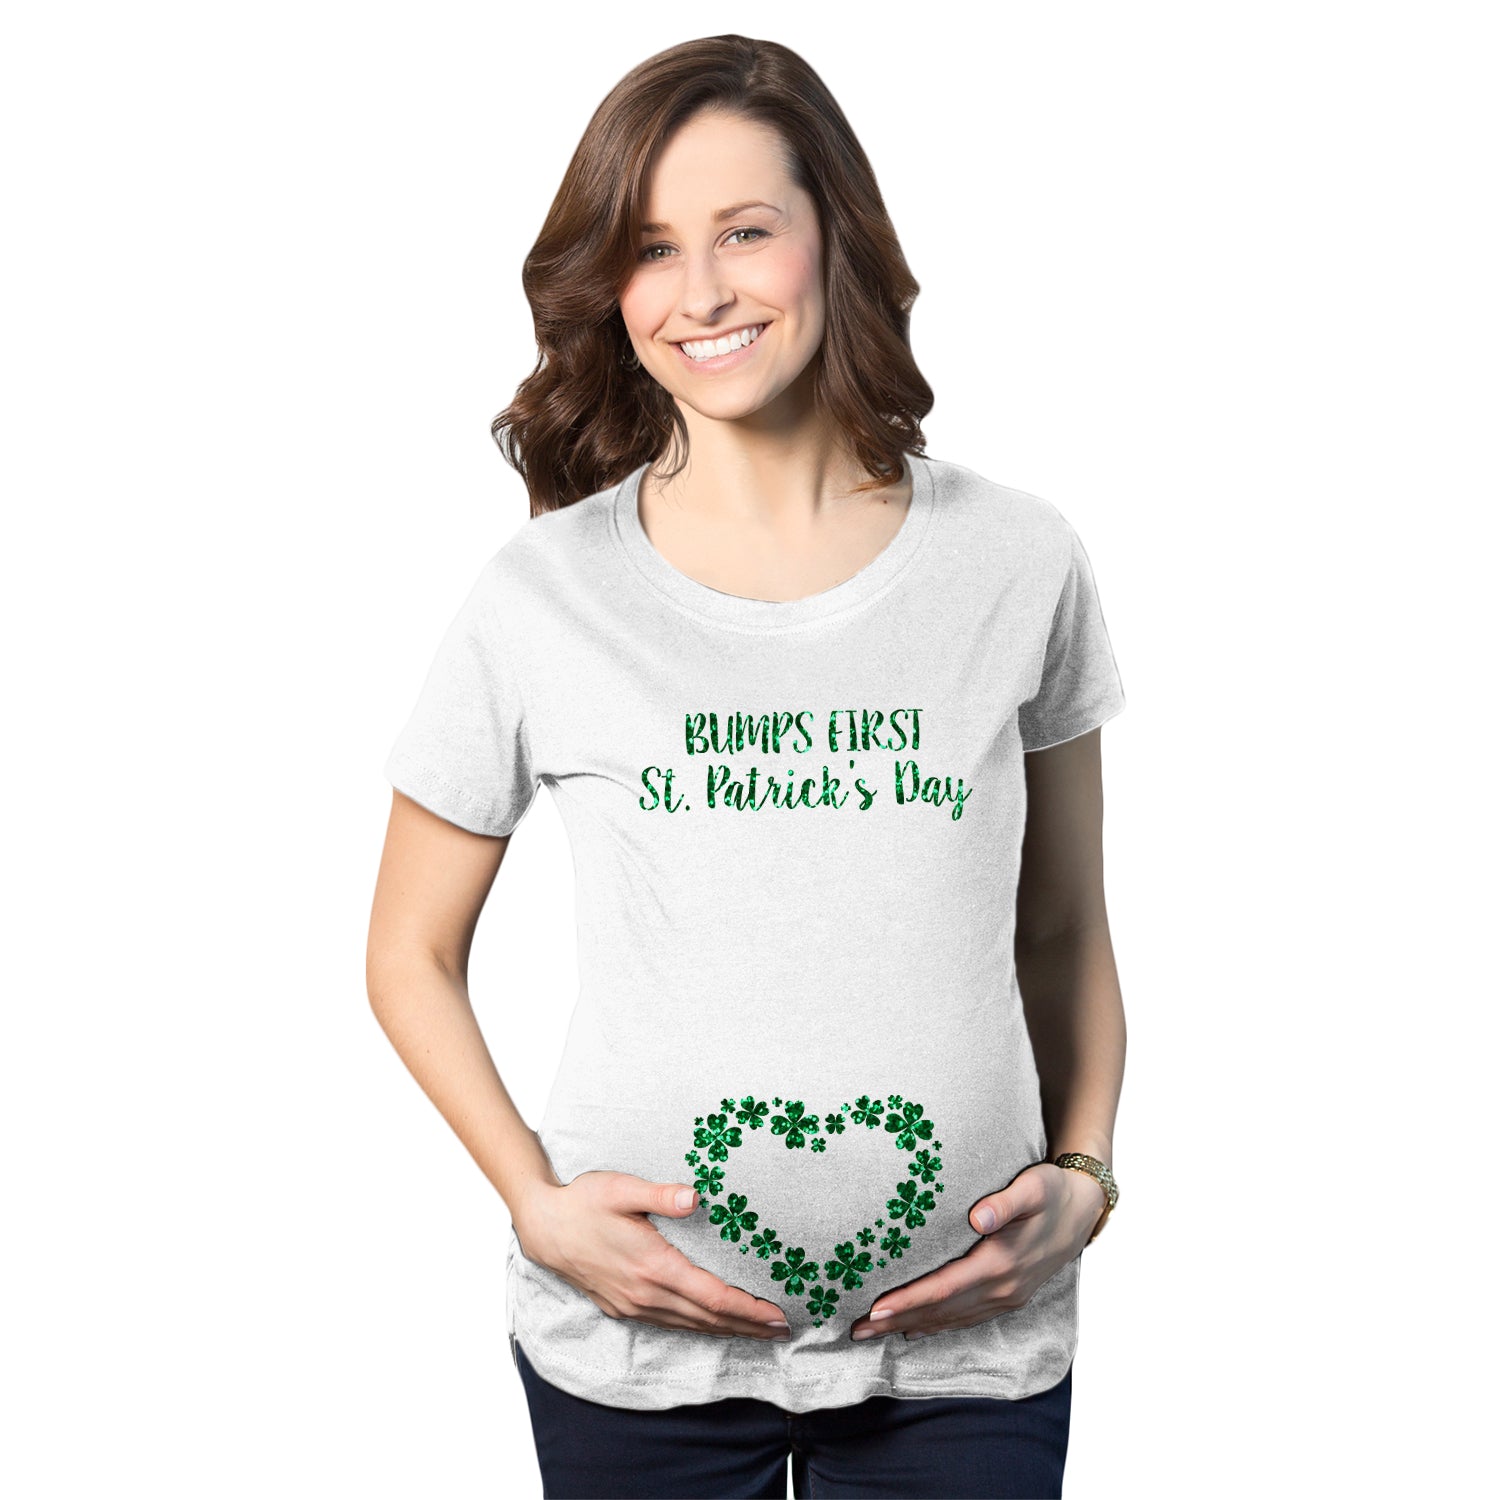 Funny White Bumps First St. Patrick’s Day Maternity T Shirt Nerdy Saint Patrick's Day Tee